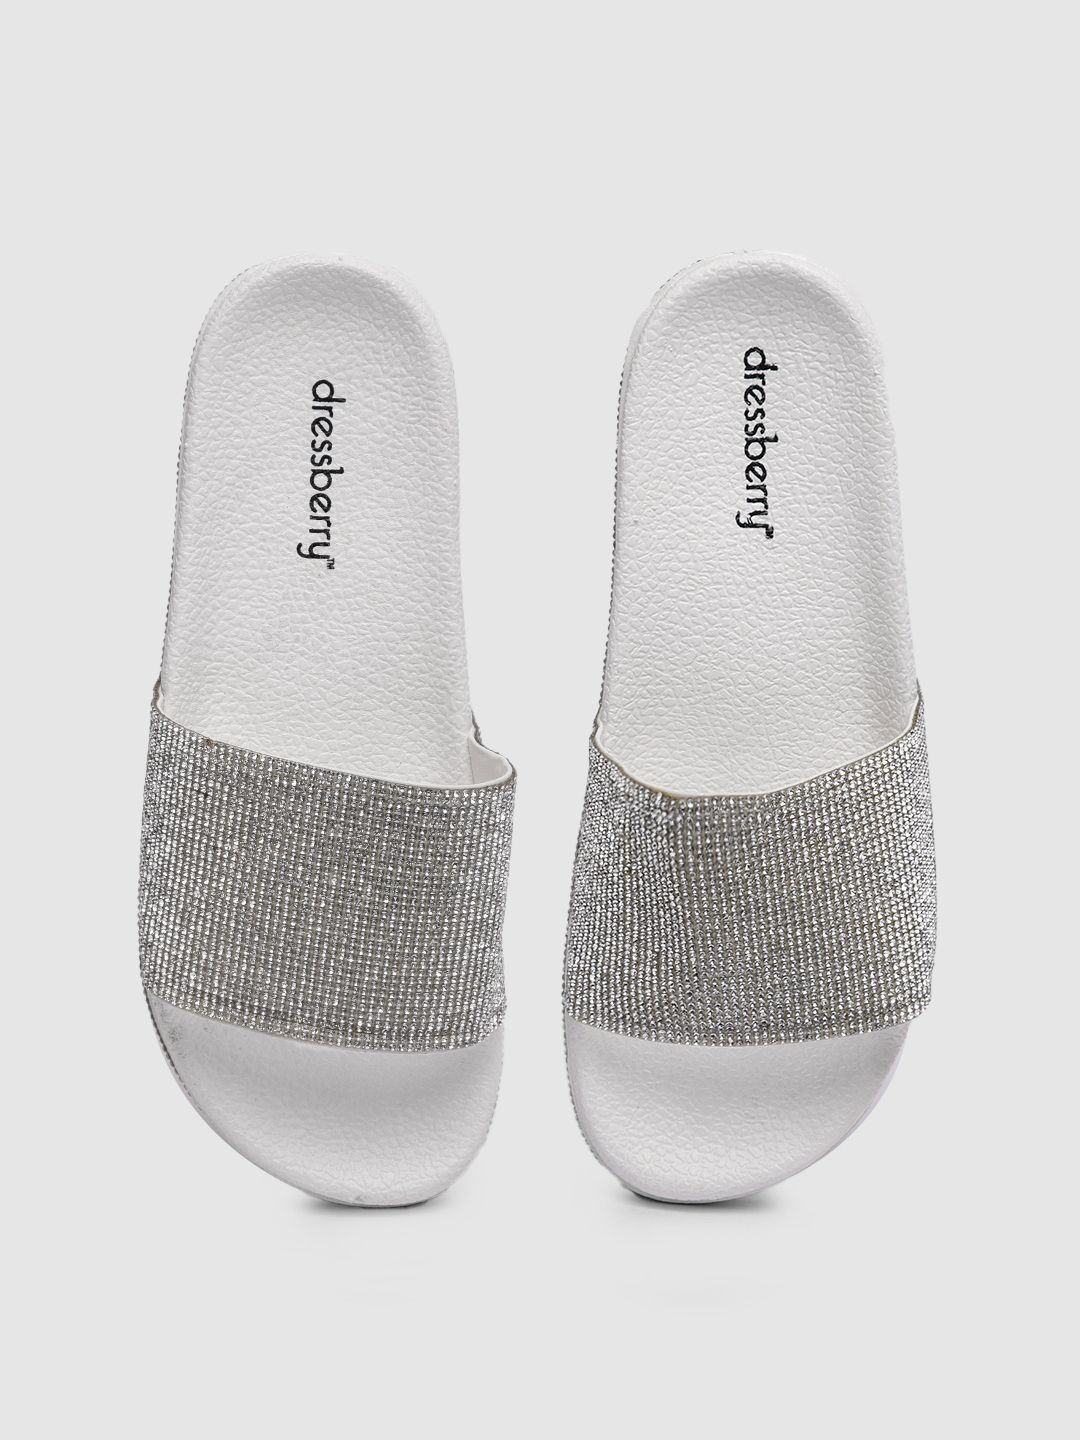 DressBerry Women Silver-Toned Embellished Sliders Price in India